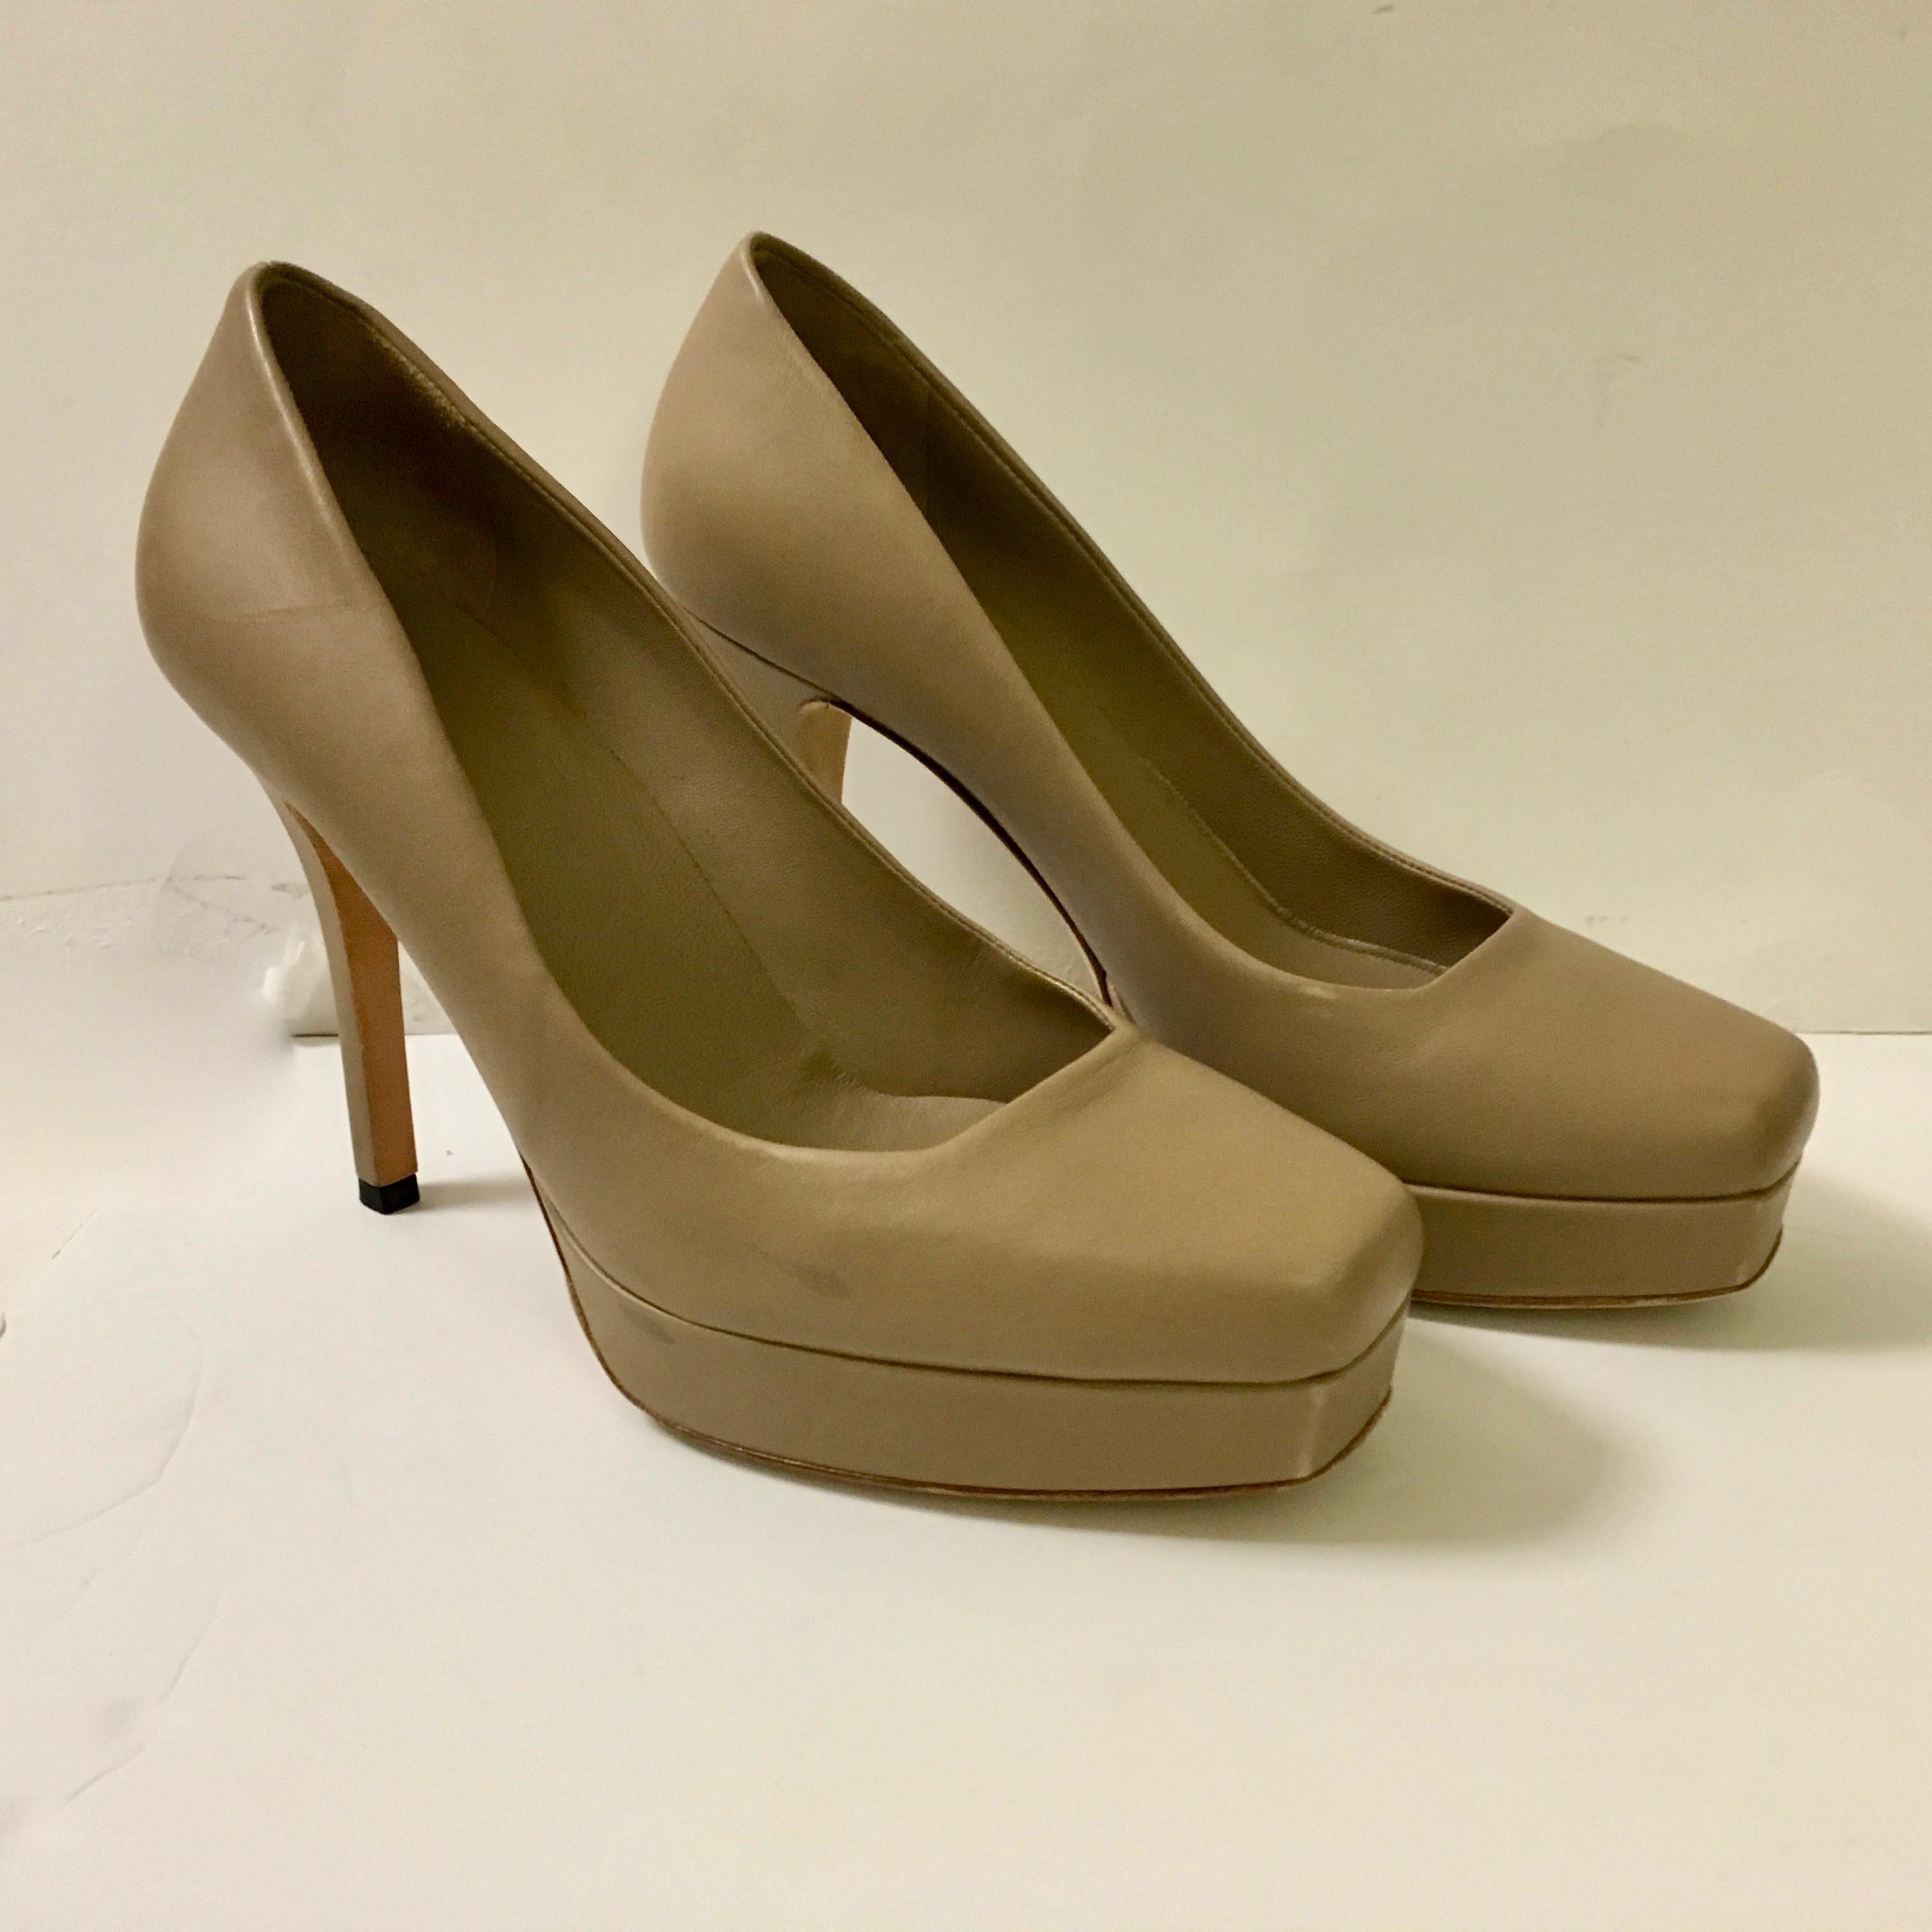 Brand new Gucci soft leather platform shoes in beige. The style is Charlotte. They are a size 37, but Gucci tends to run a little on the big size, so it probably would best fit a size 37.5. The size of the heel is 4 inches. There is a 1 inch